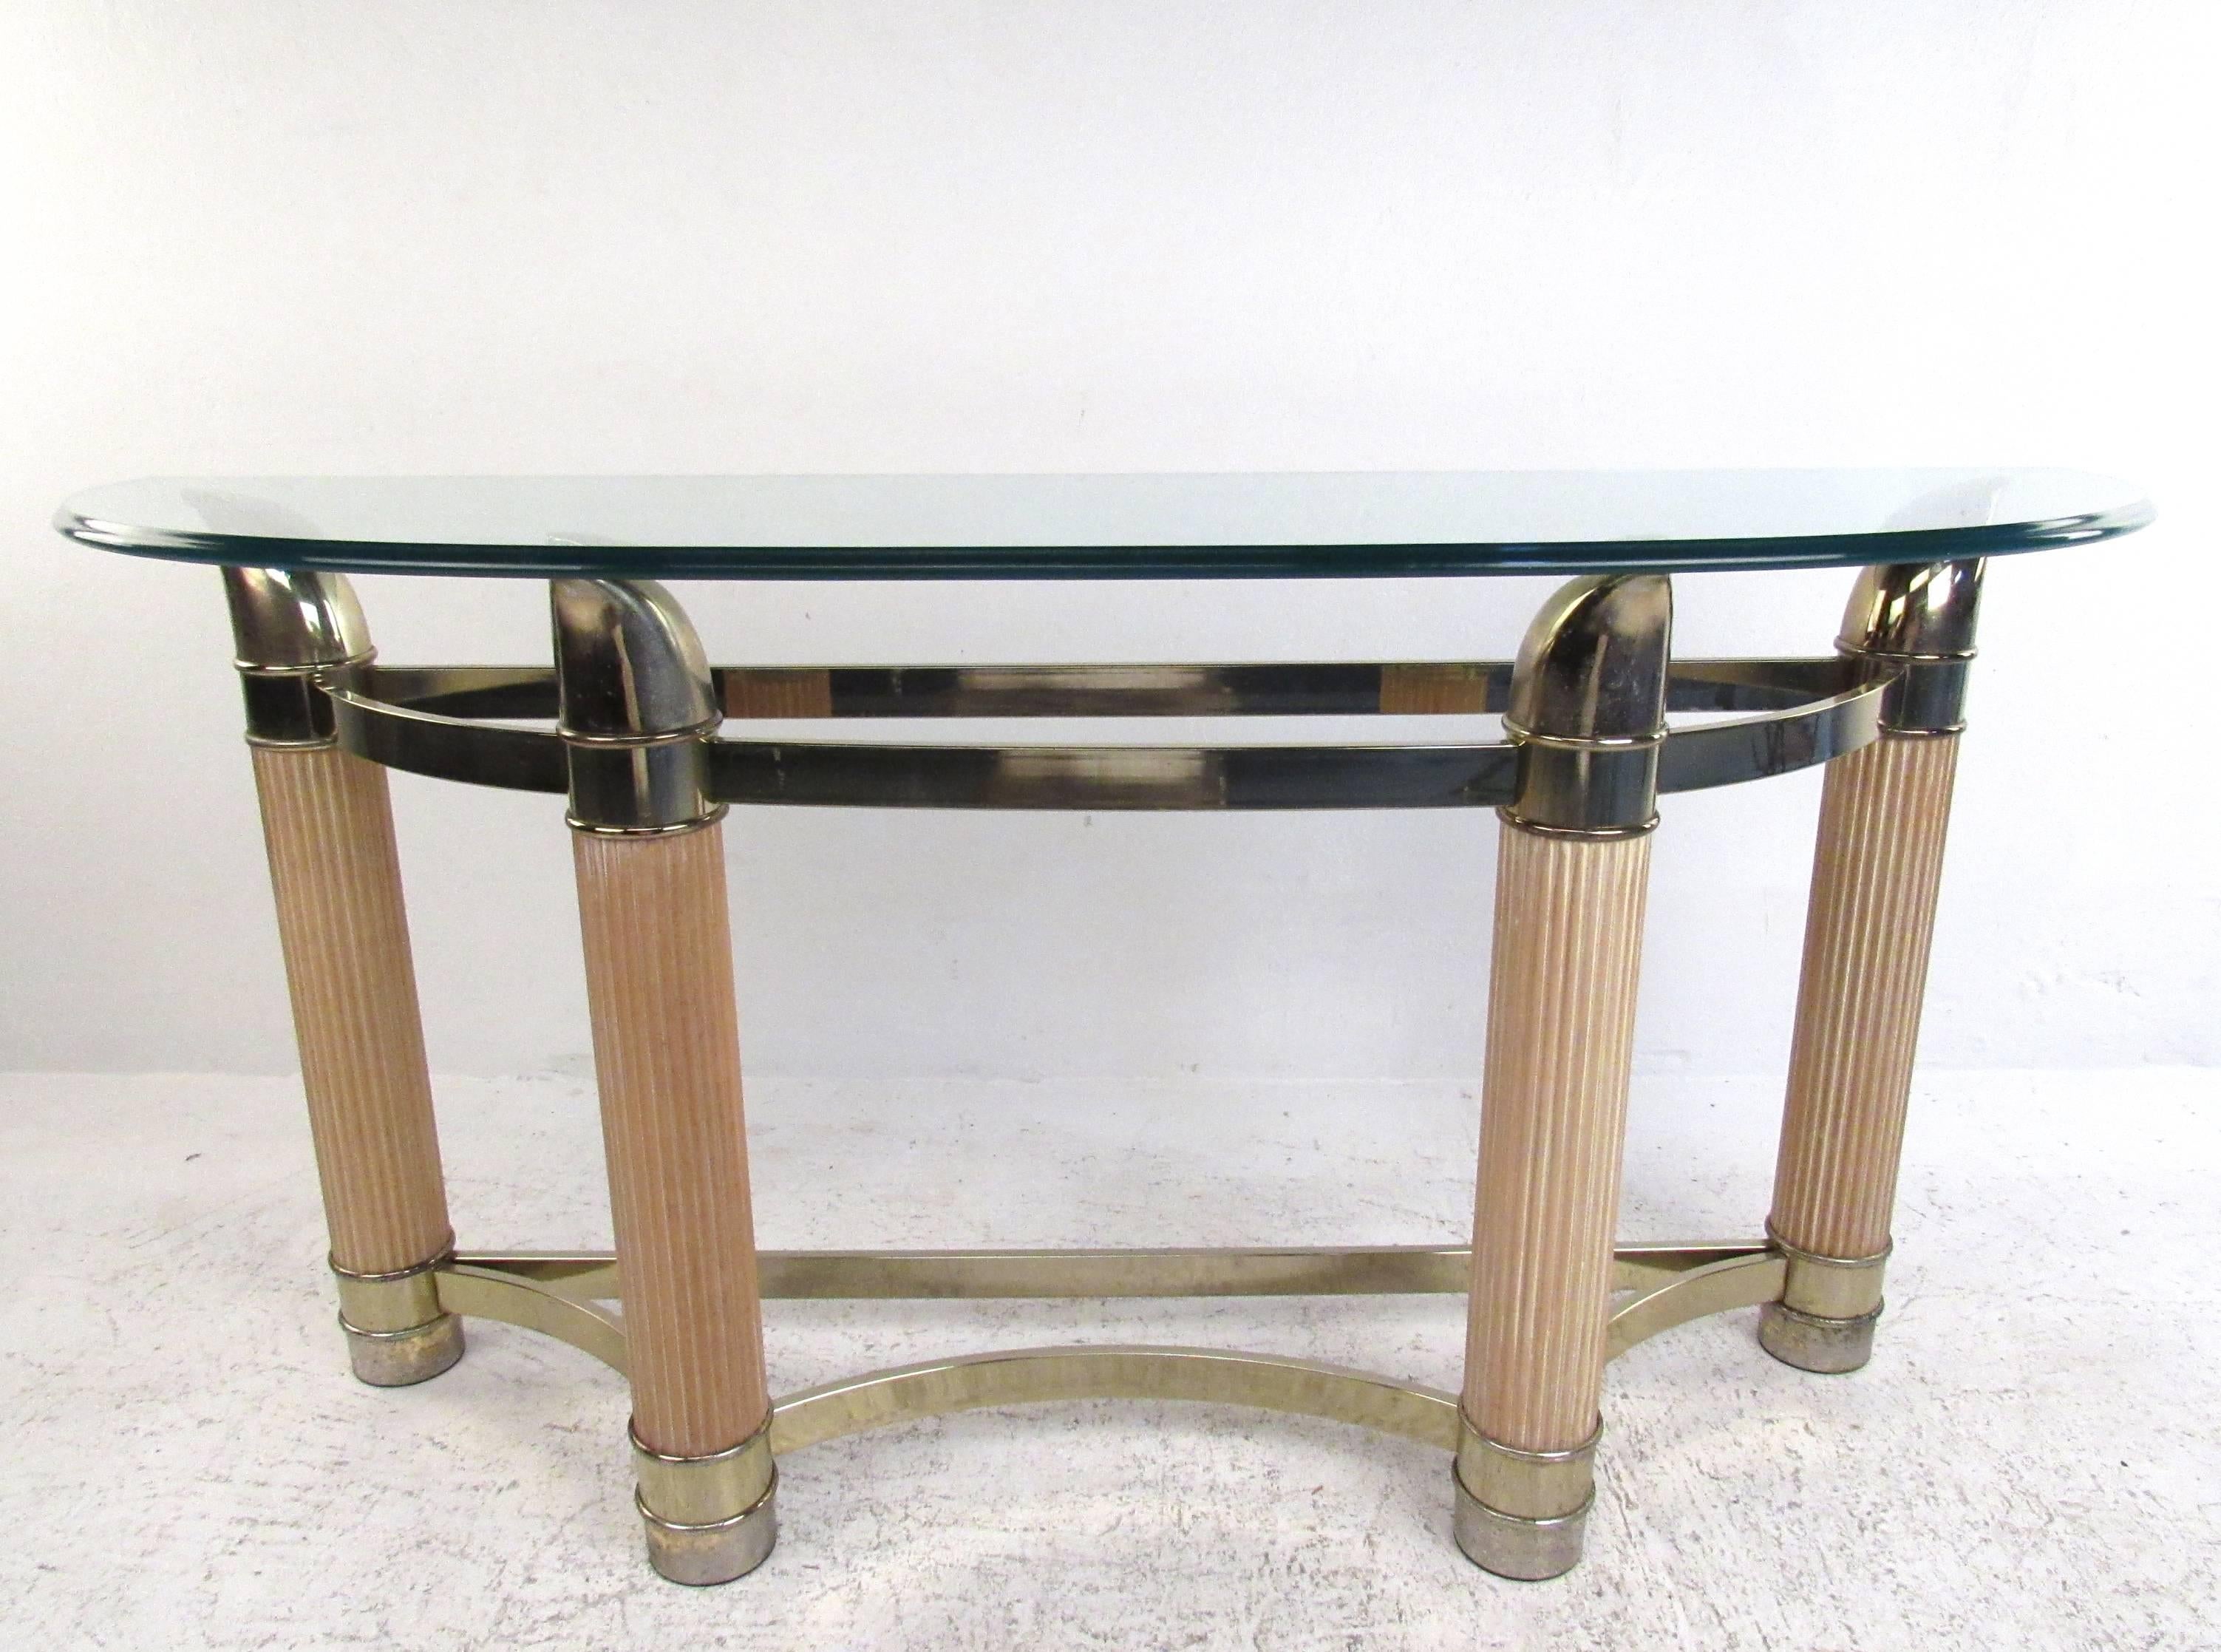 This stylish vintage table features sturdy construction with wonderful decorative details. Brass finish with unique sculpted points add to the elegance of this Mid-Century demilune table. Perfect display table for entryway, foyer, or hall use,